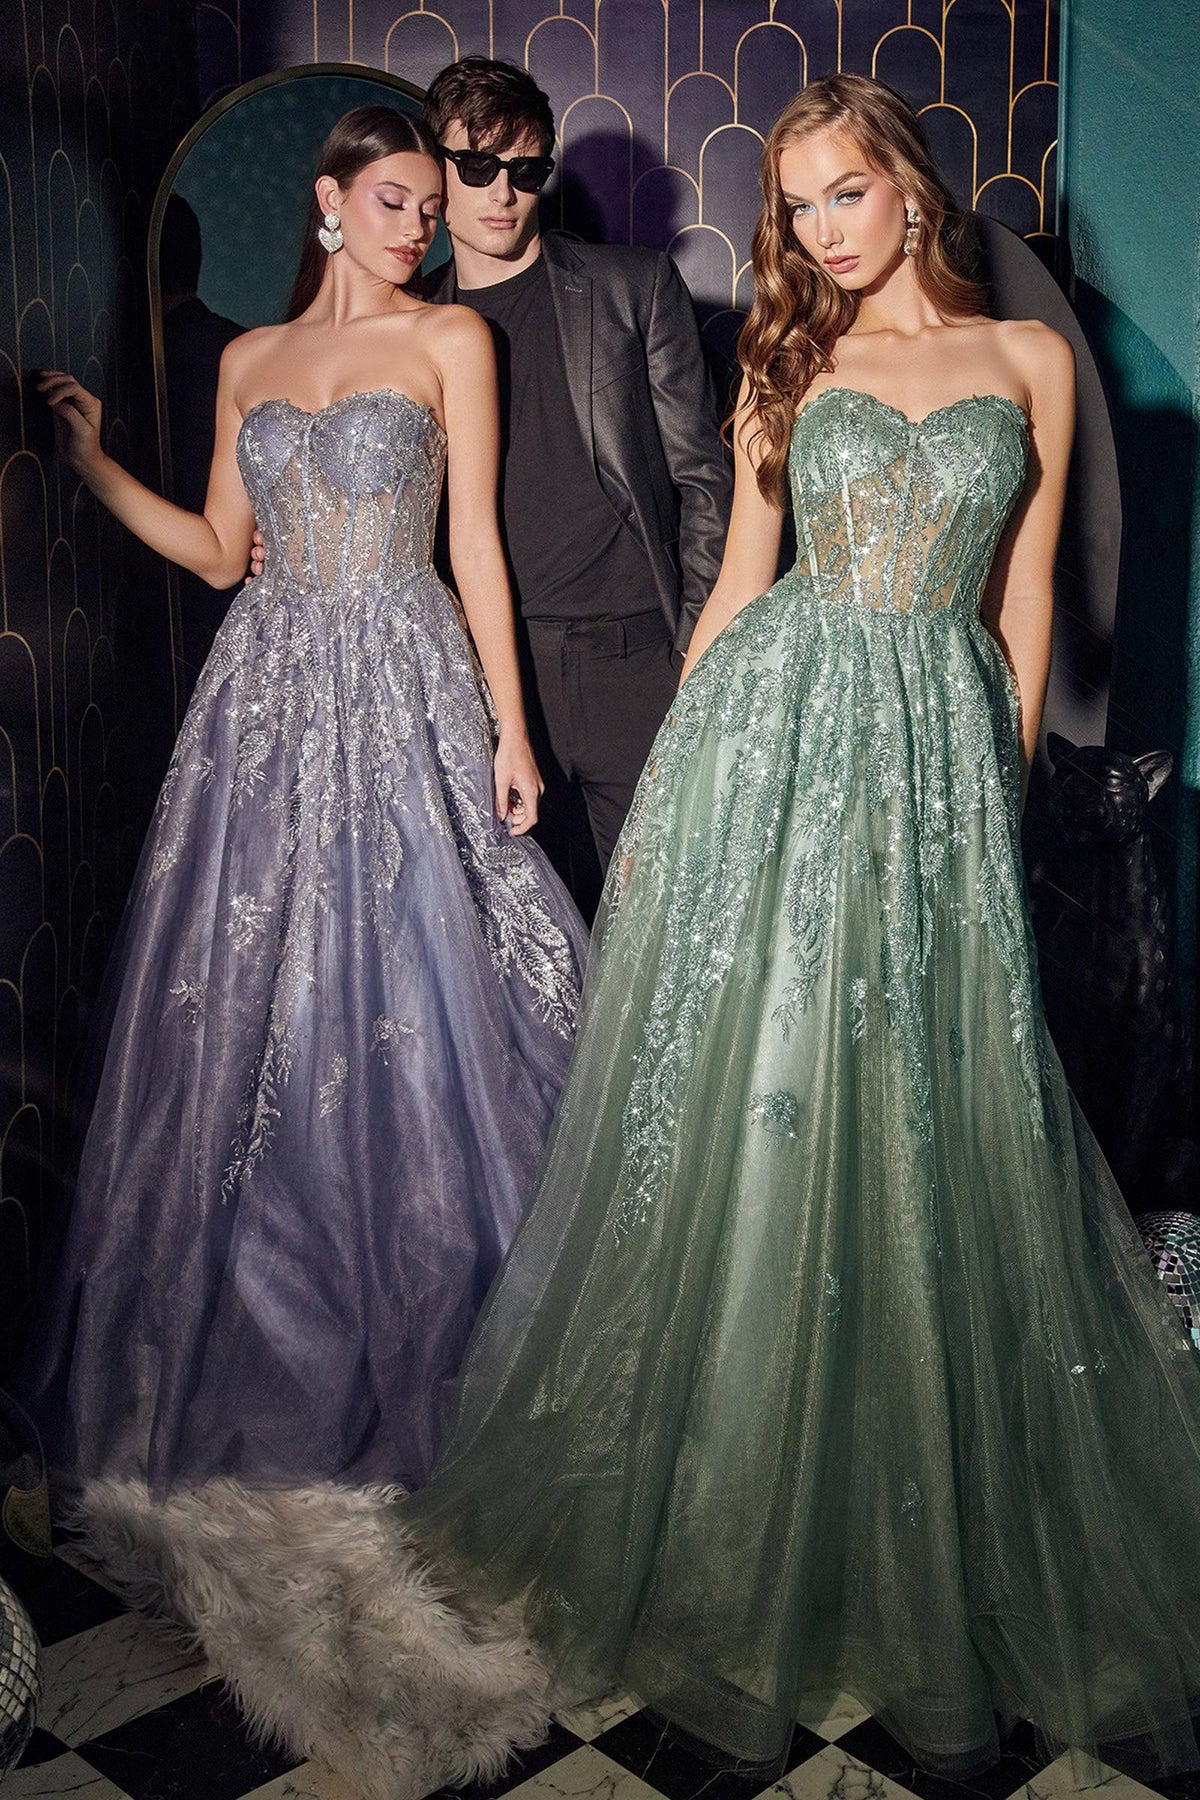 Princess Ball Gown Prom Dresses | NORMA REED